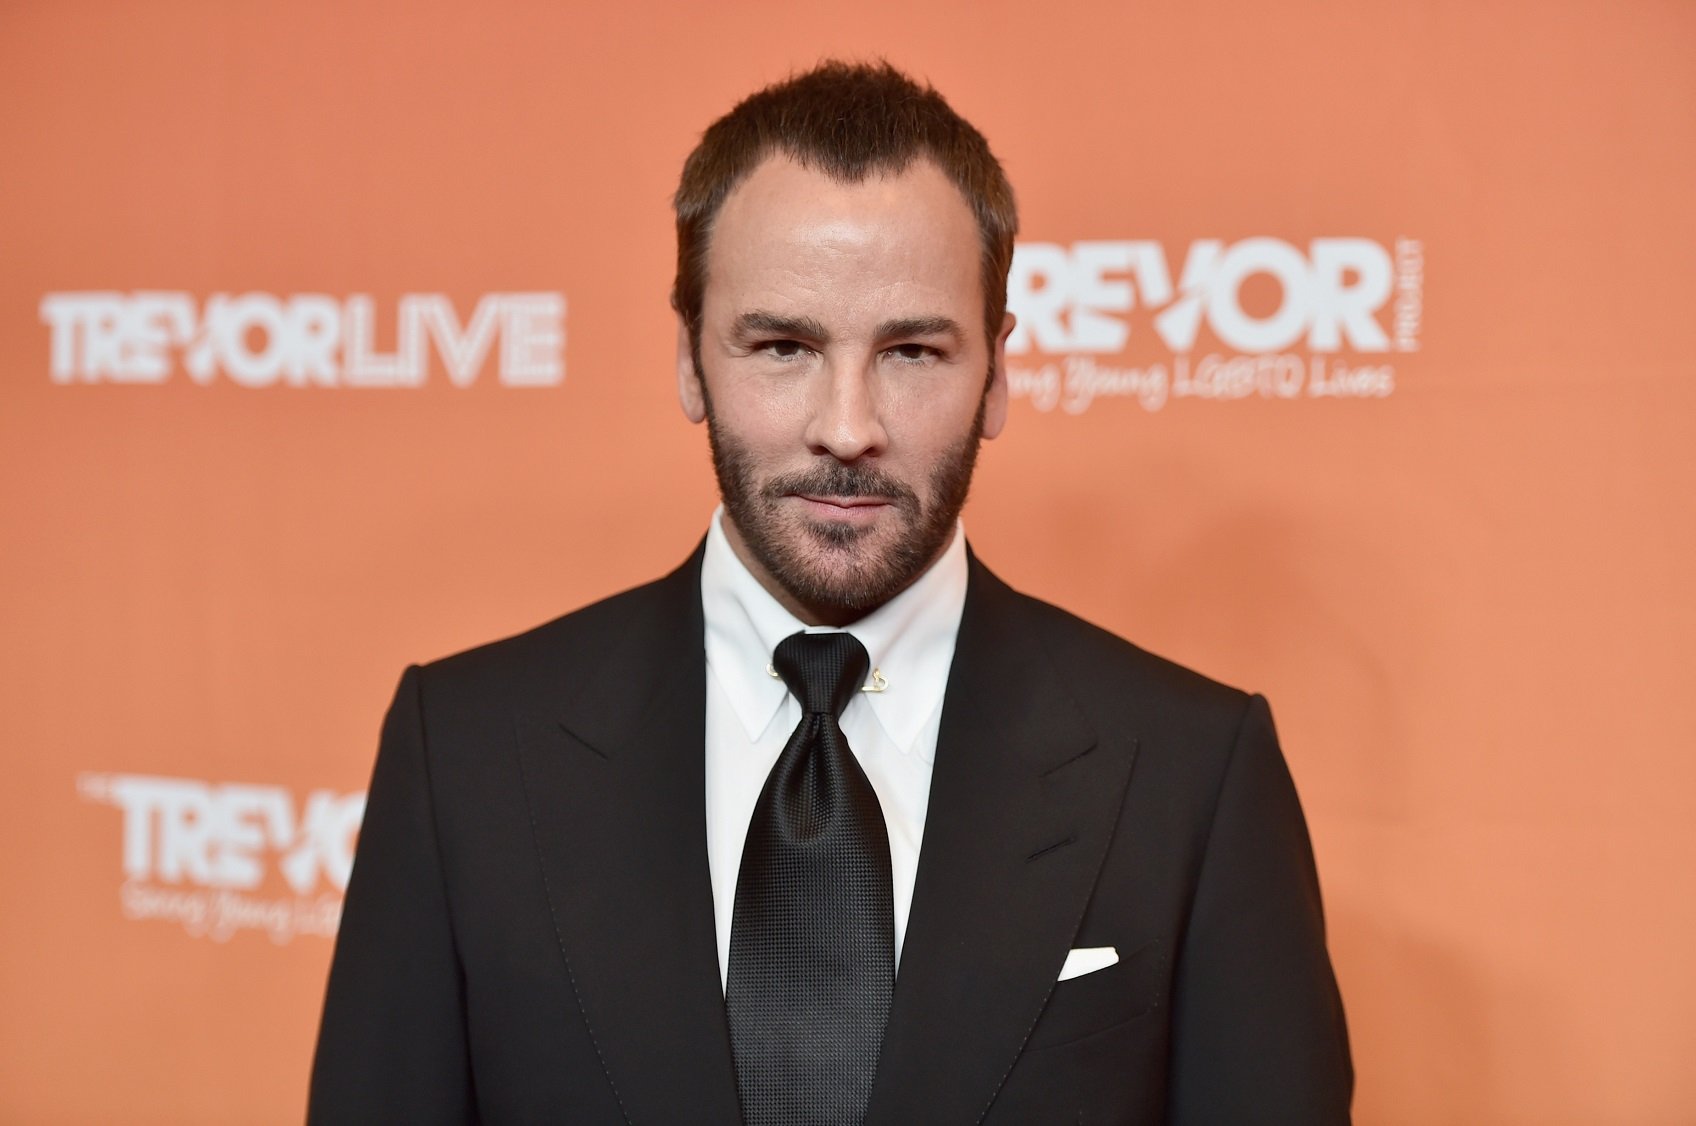 Beauty & The Brand : The History of Tom Ford Timeline